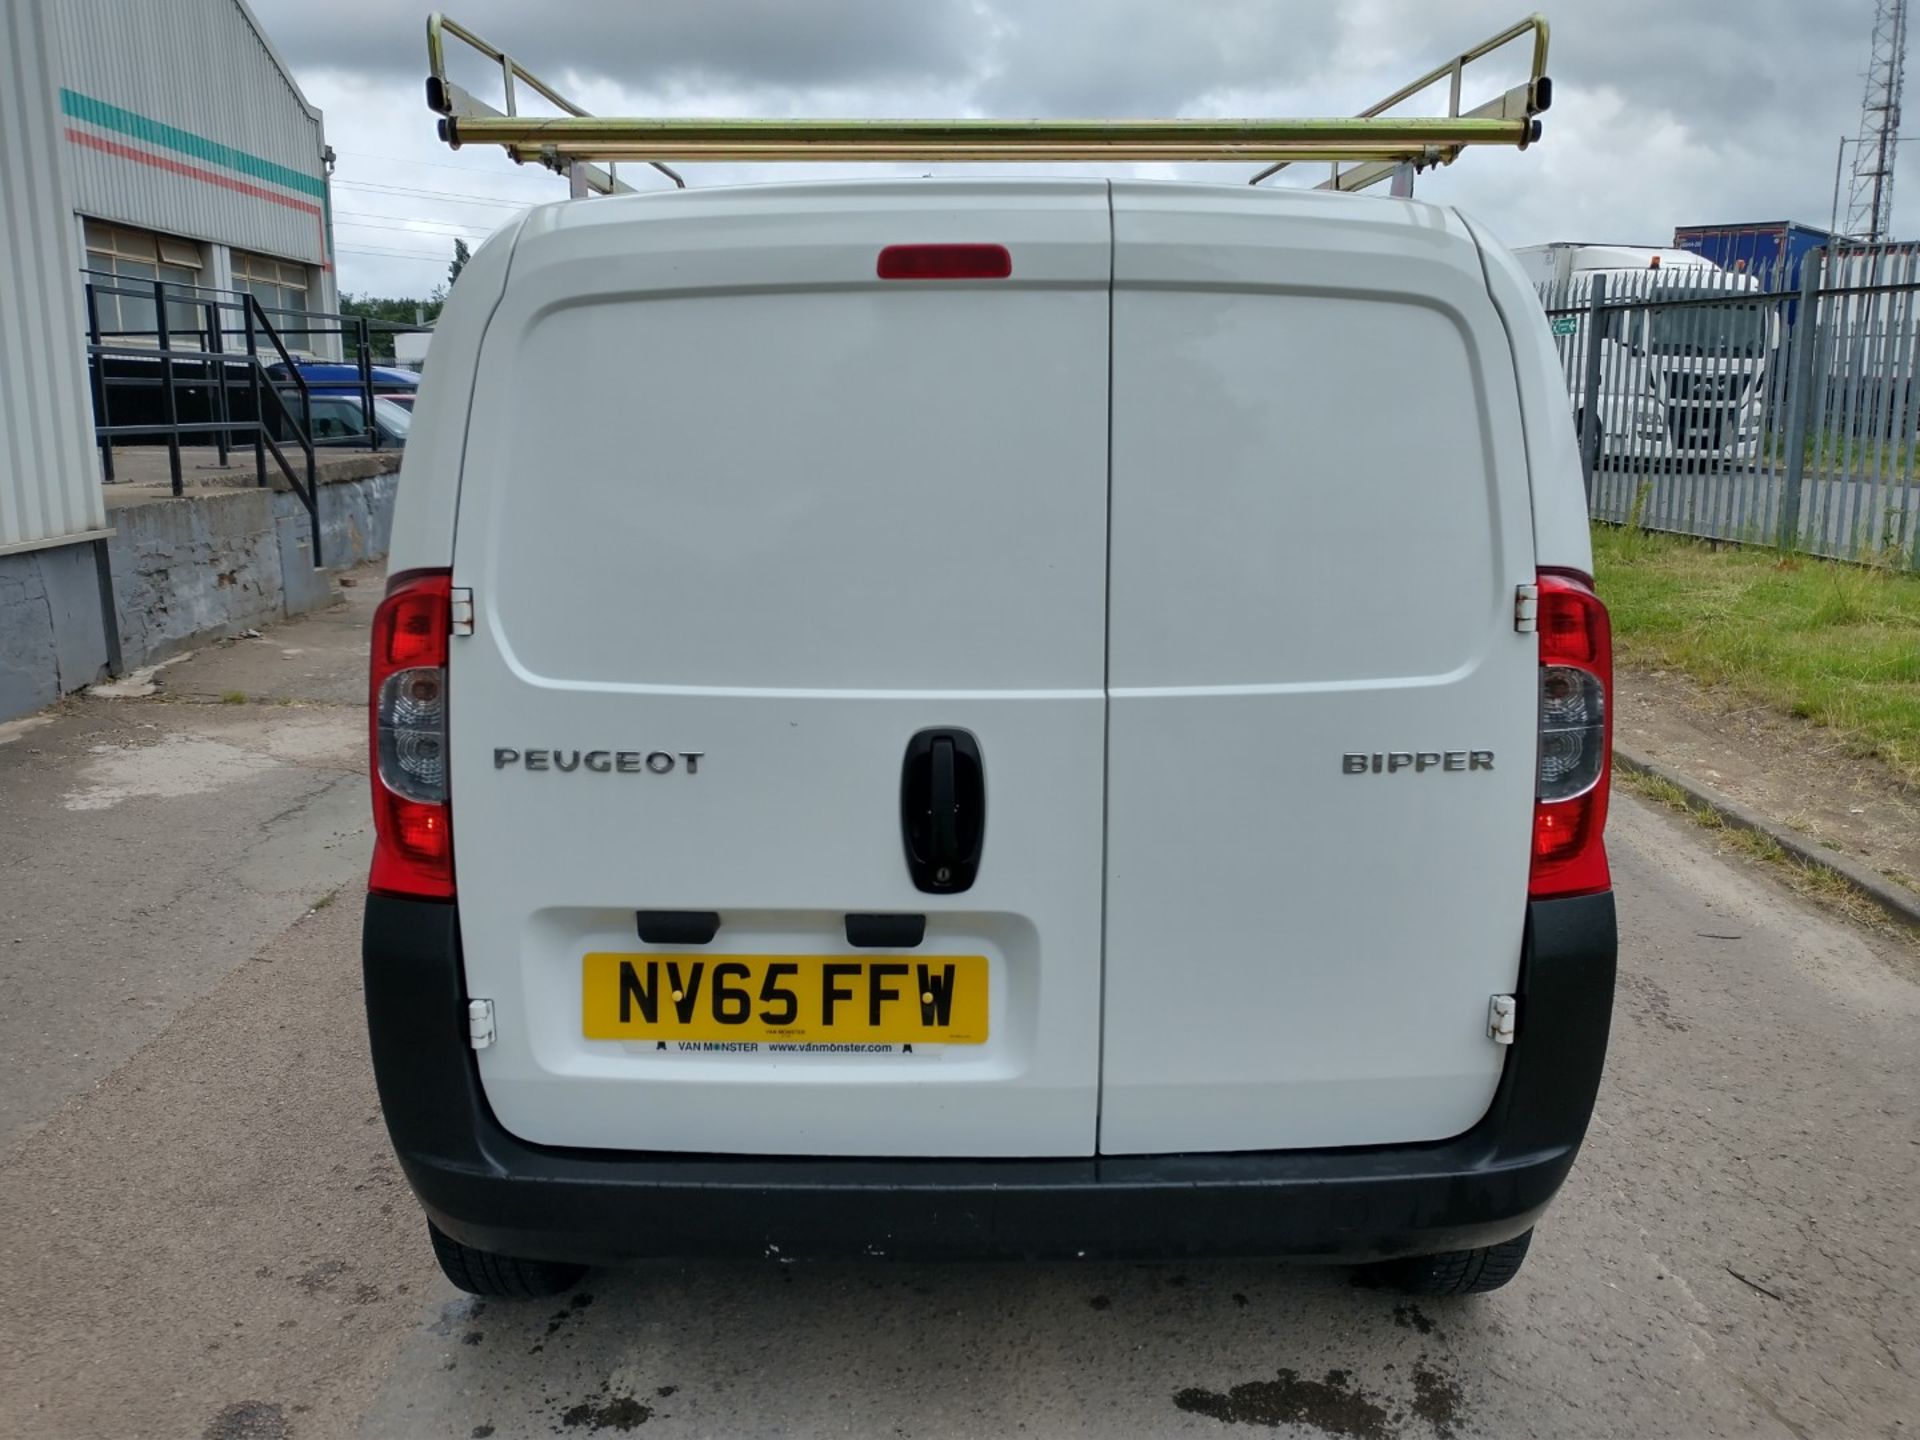 2015 Peugeot Bipper S Hdi White Panel - CL505 - Ref: VVS031 - Location: Corby, Northamptonshire - Image 21 of 25